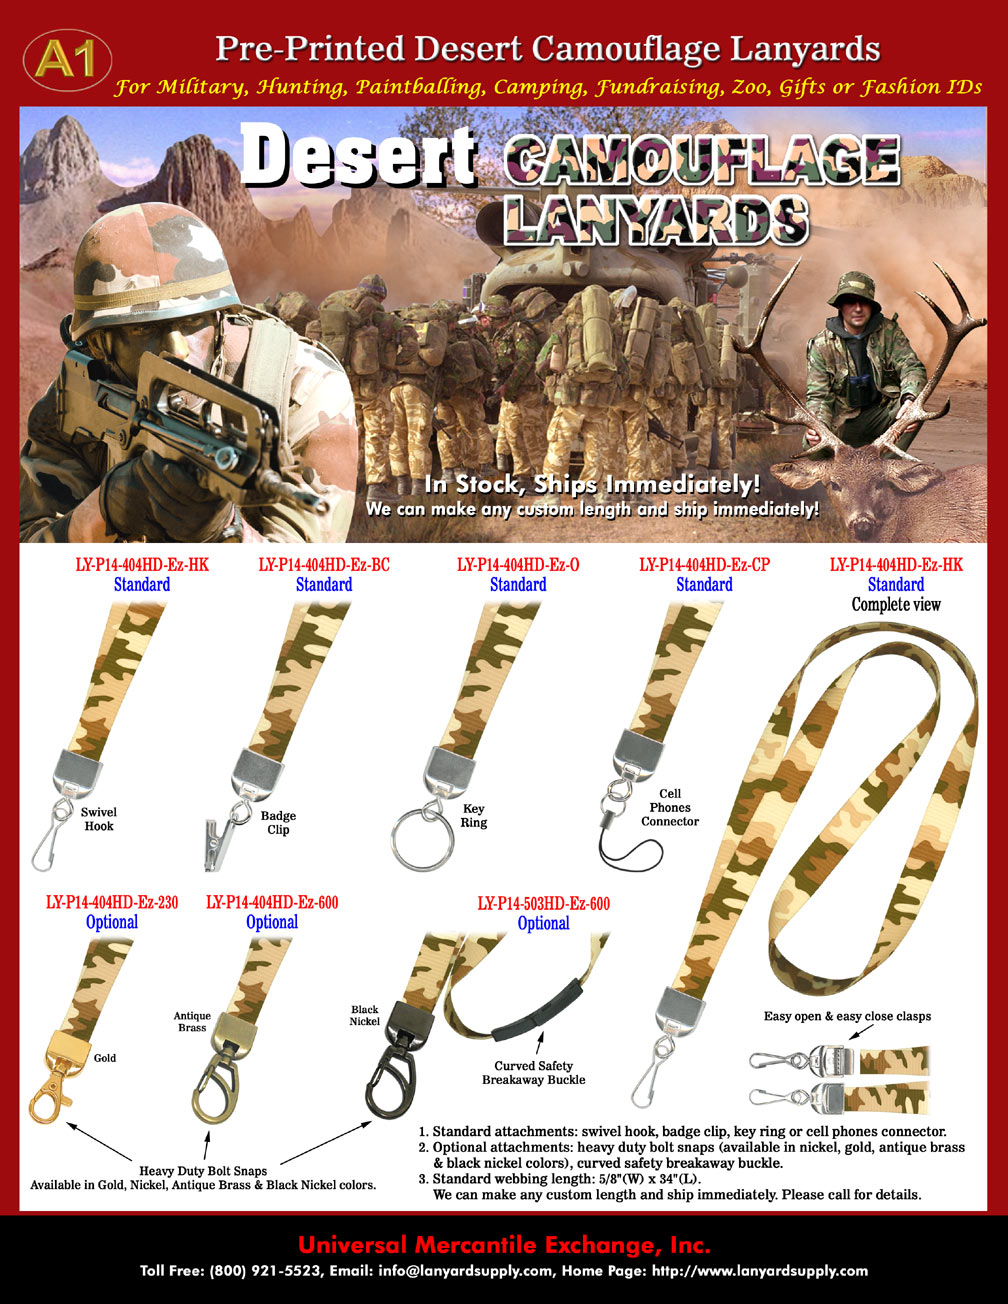 Desert Camo Lanyards With Great Fashion ! Desert Storm Camouflage Style